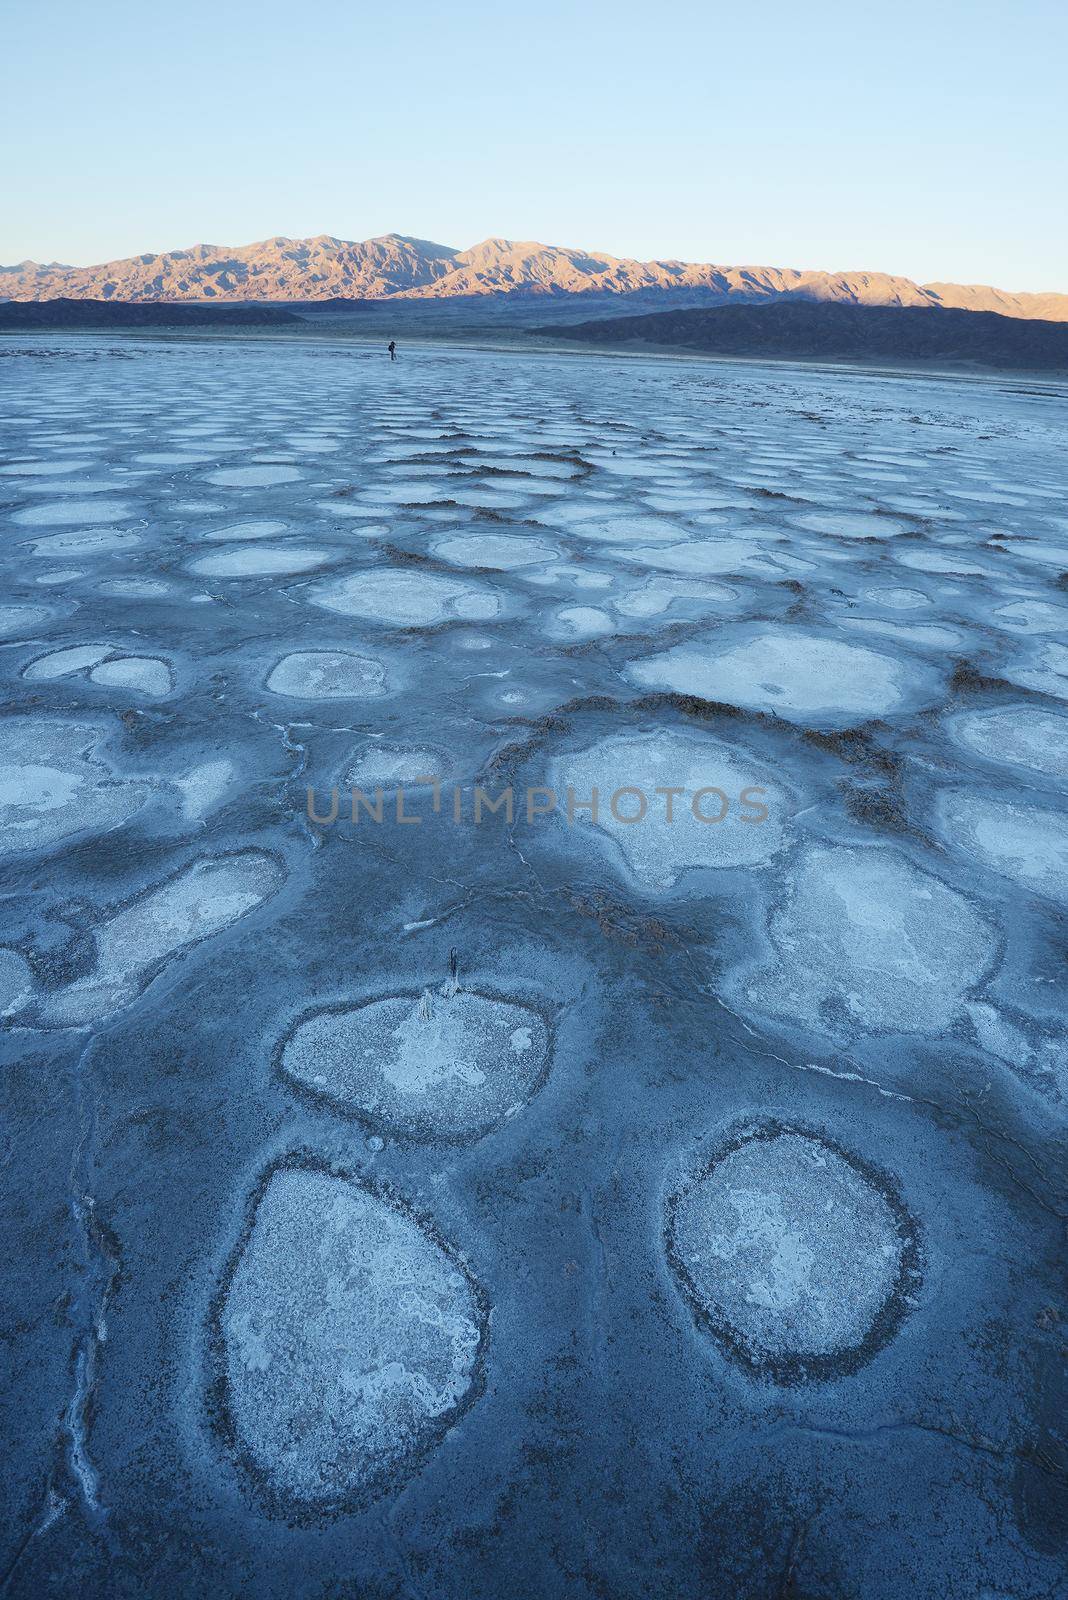 dried mud pattern at a salt flat basin at death valley national park